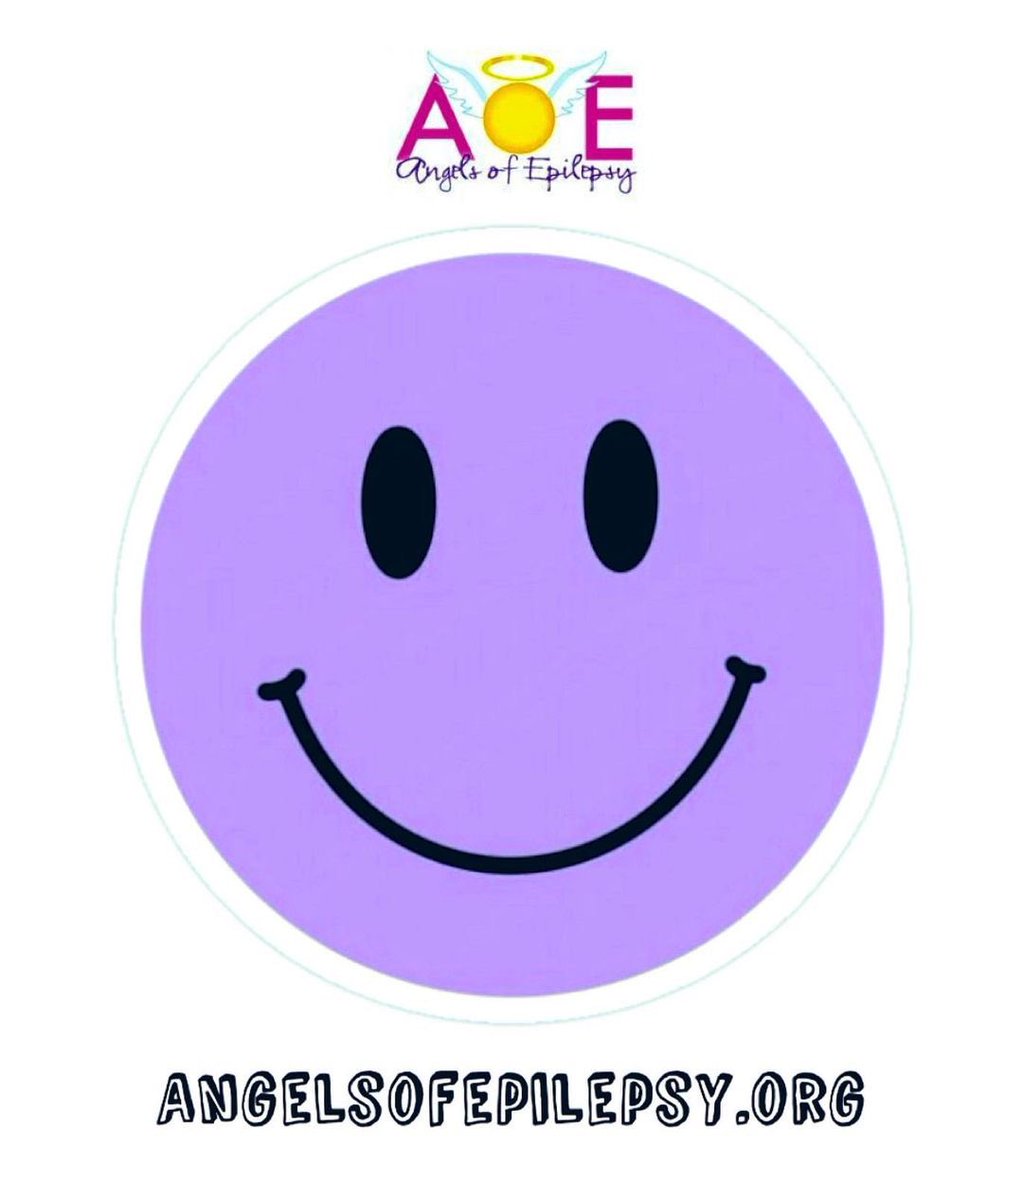 Happy #PURPLEFriday 💜 “If you have only one smile in you, give it to the people you love.” - Maya Angelou Make A Donation by visiting angelsofepilepsy.org #AngelsOfEpilepsy #AOEinc #MakeADonation #AOEcares #AOEsupports #AOElovesYOU #SMILE